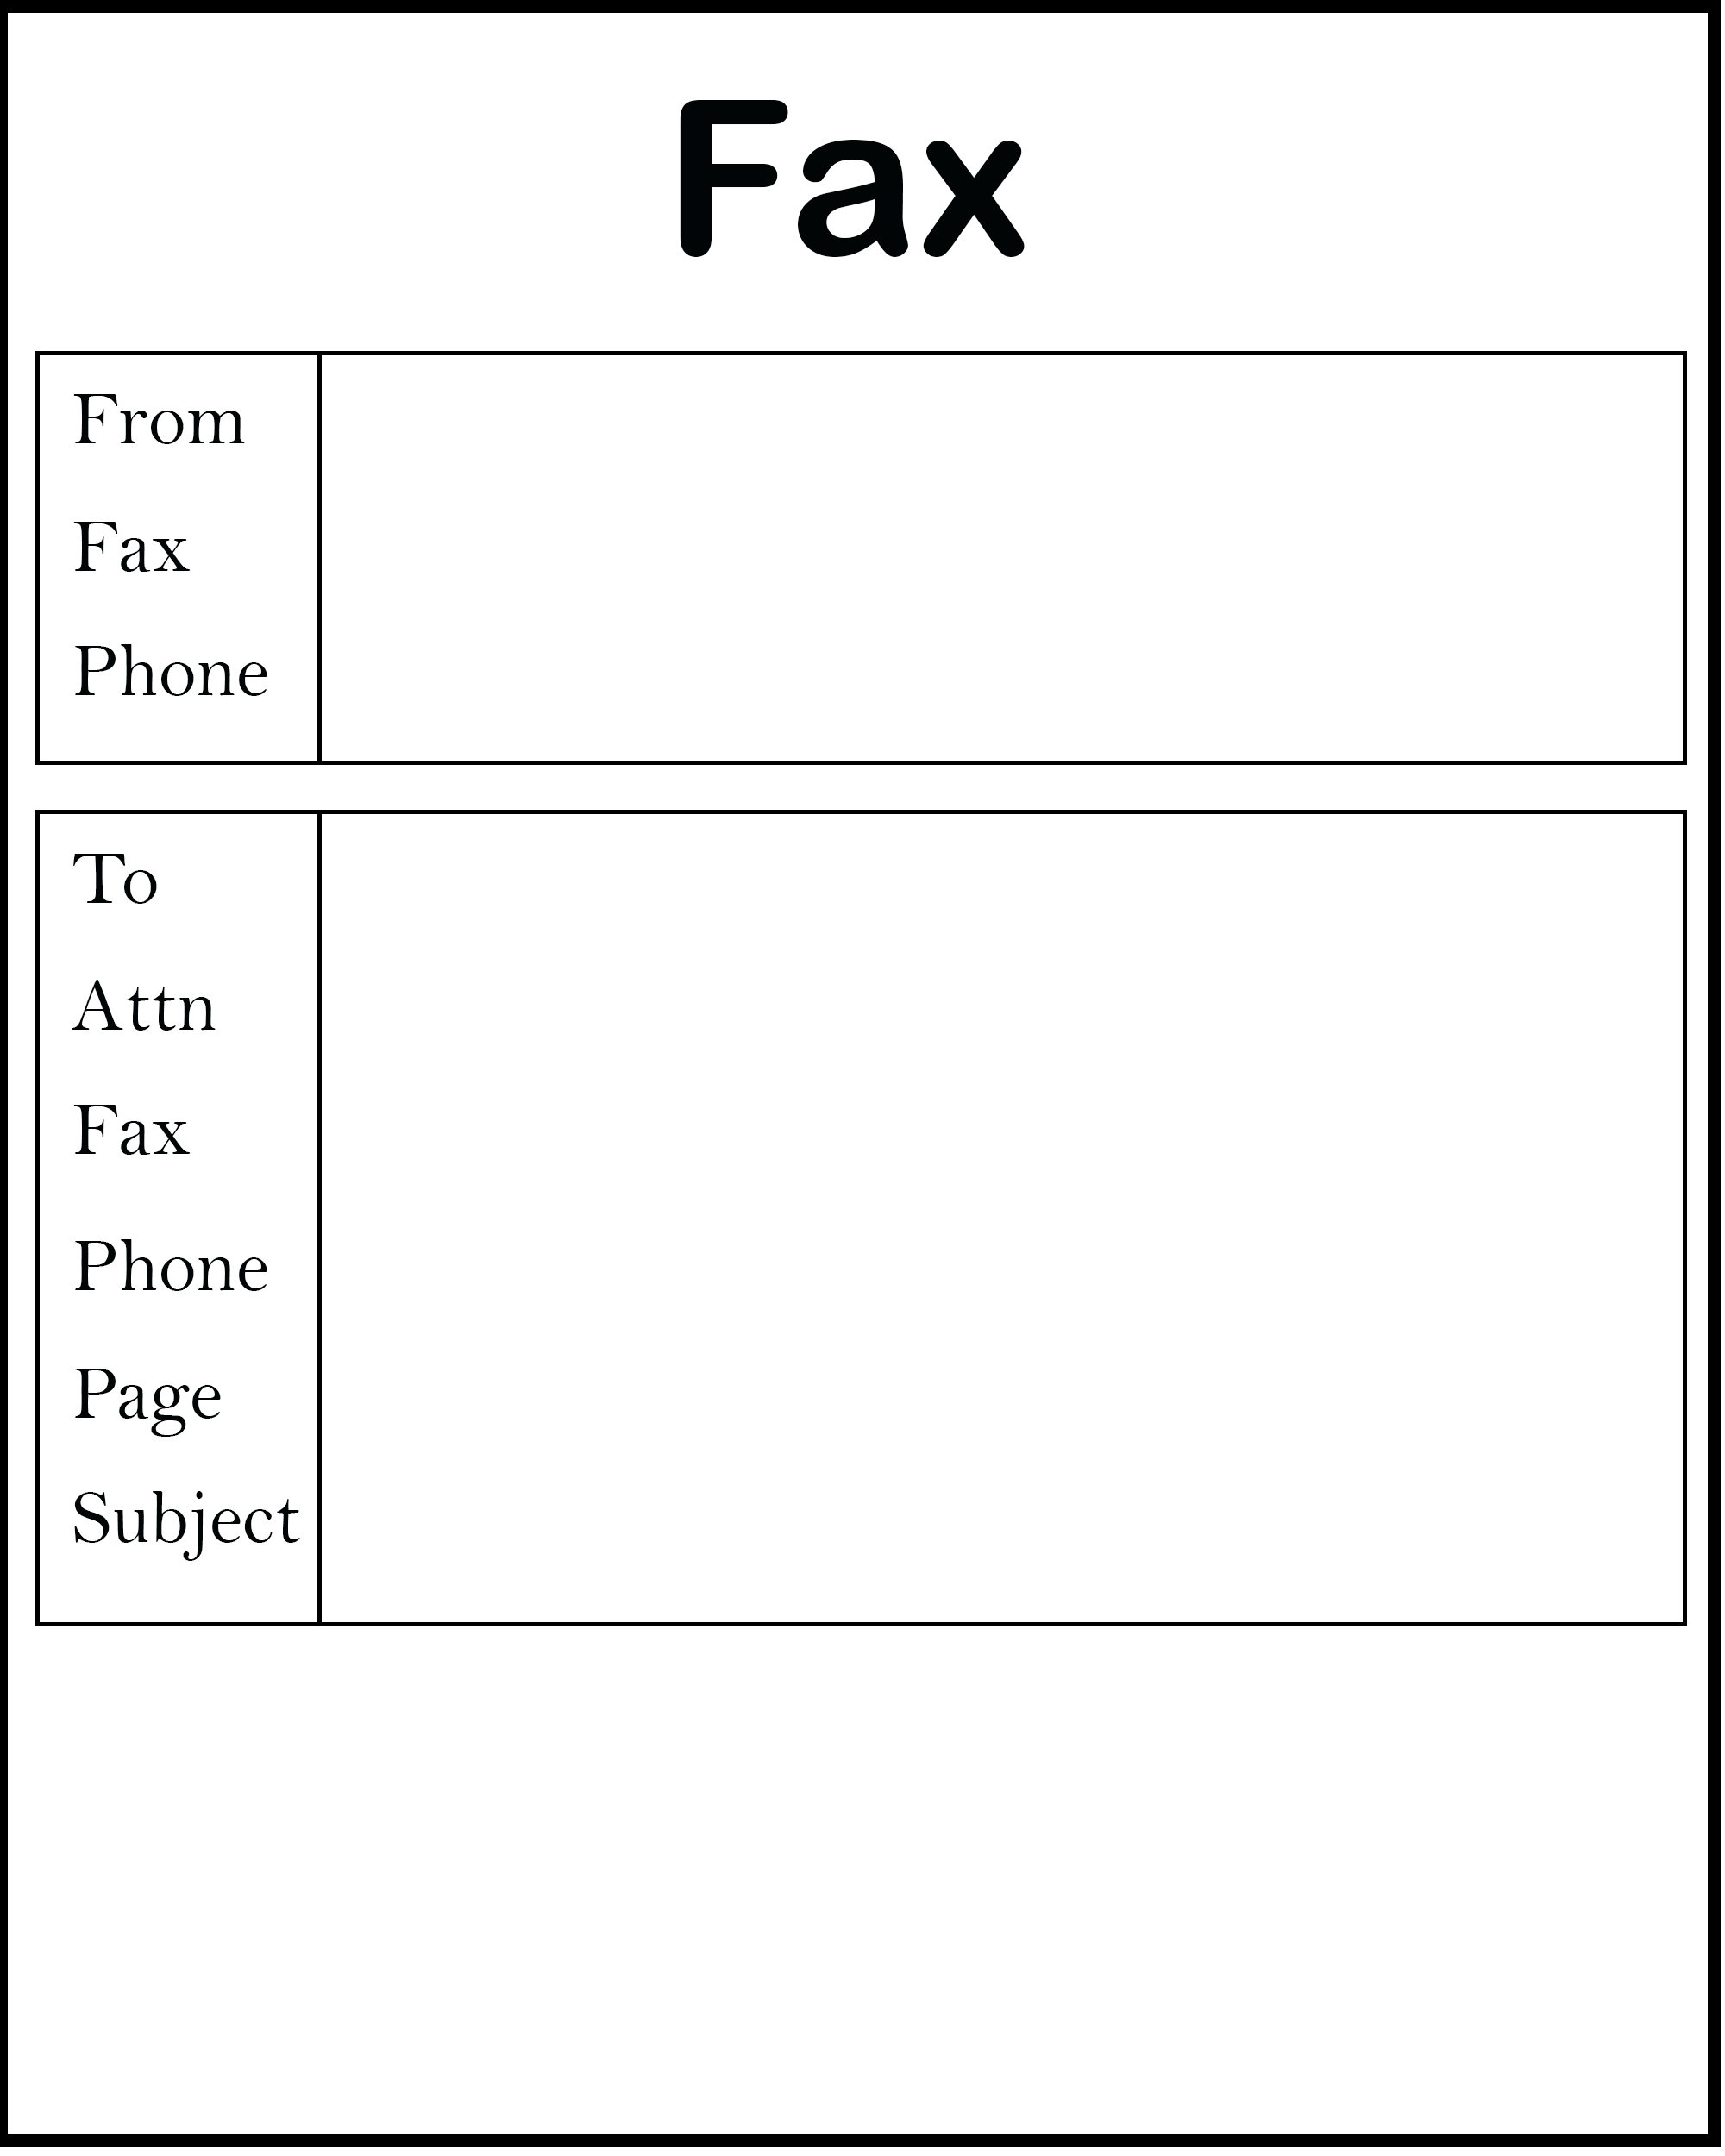 fax-cover-sheet-fax-cover-sheet-template